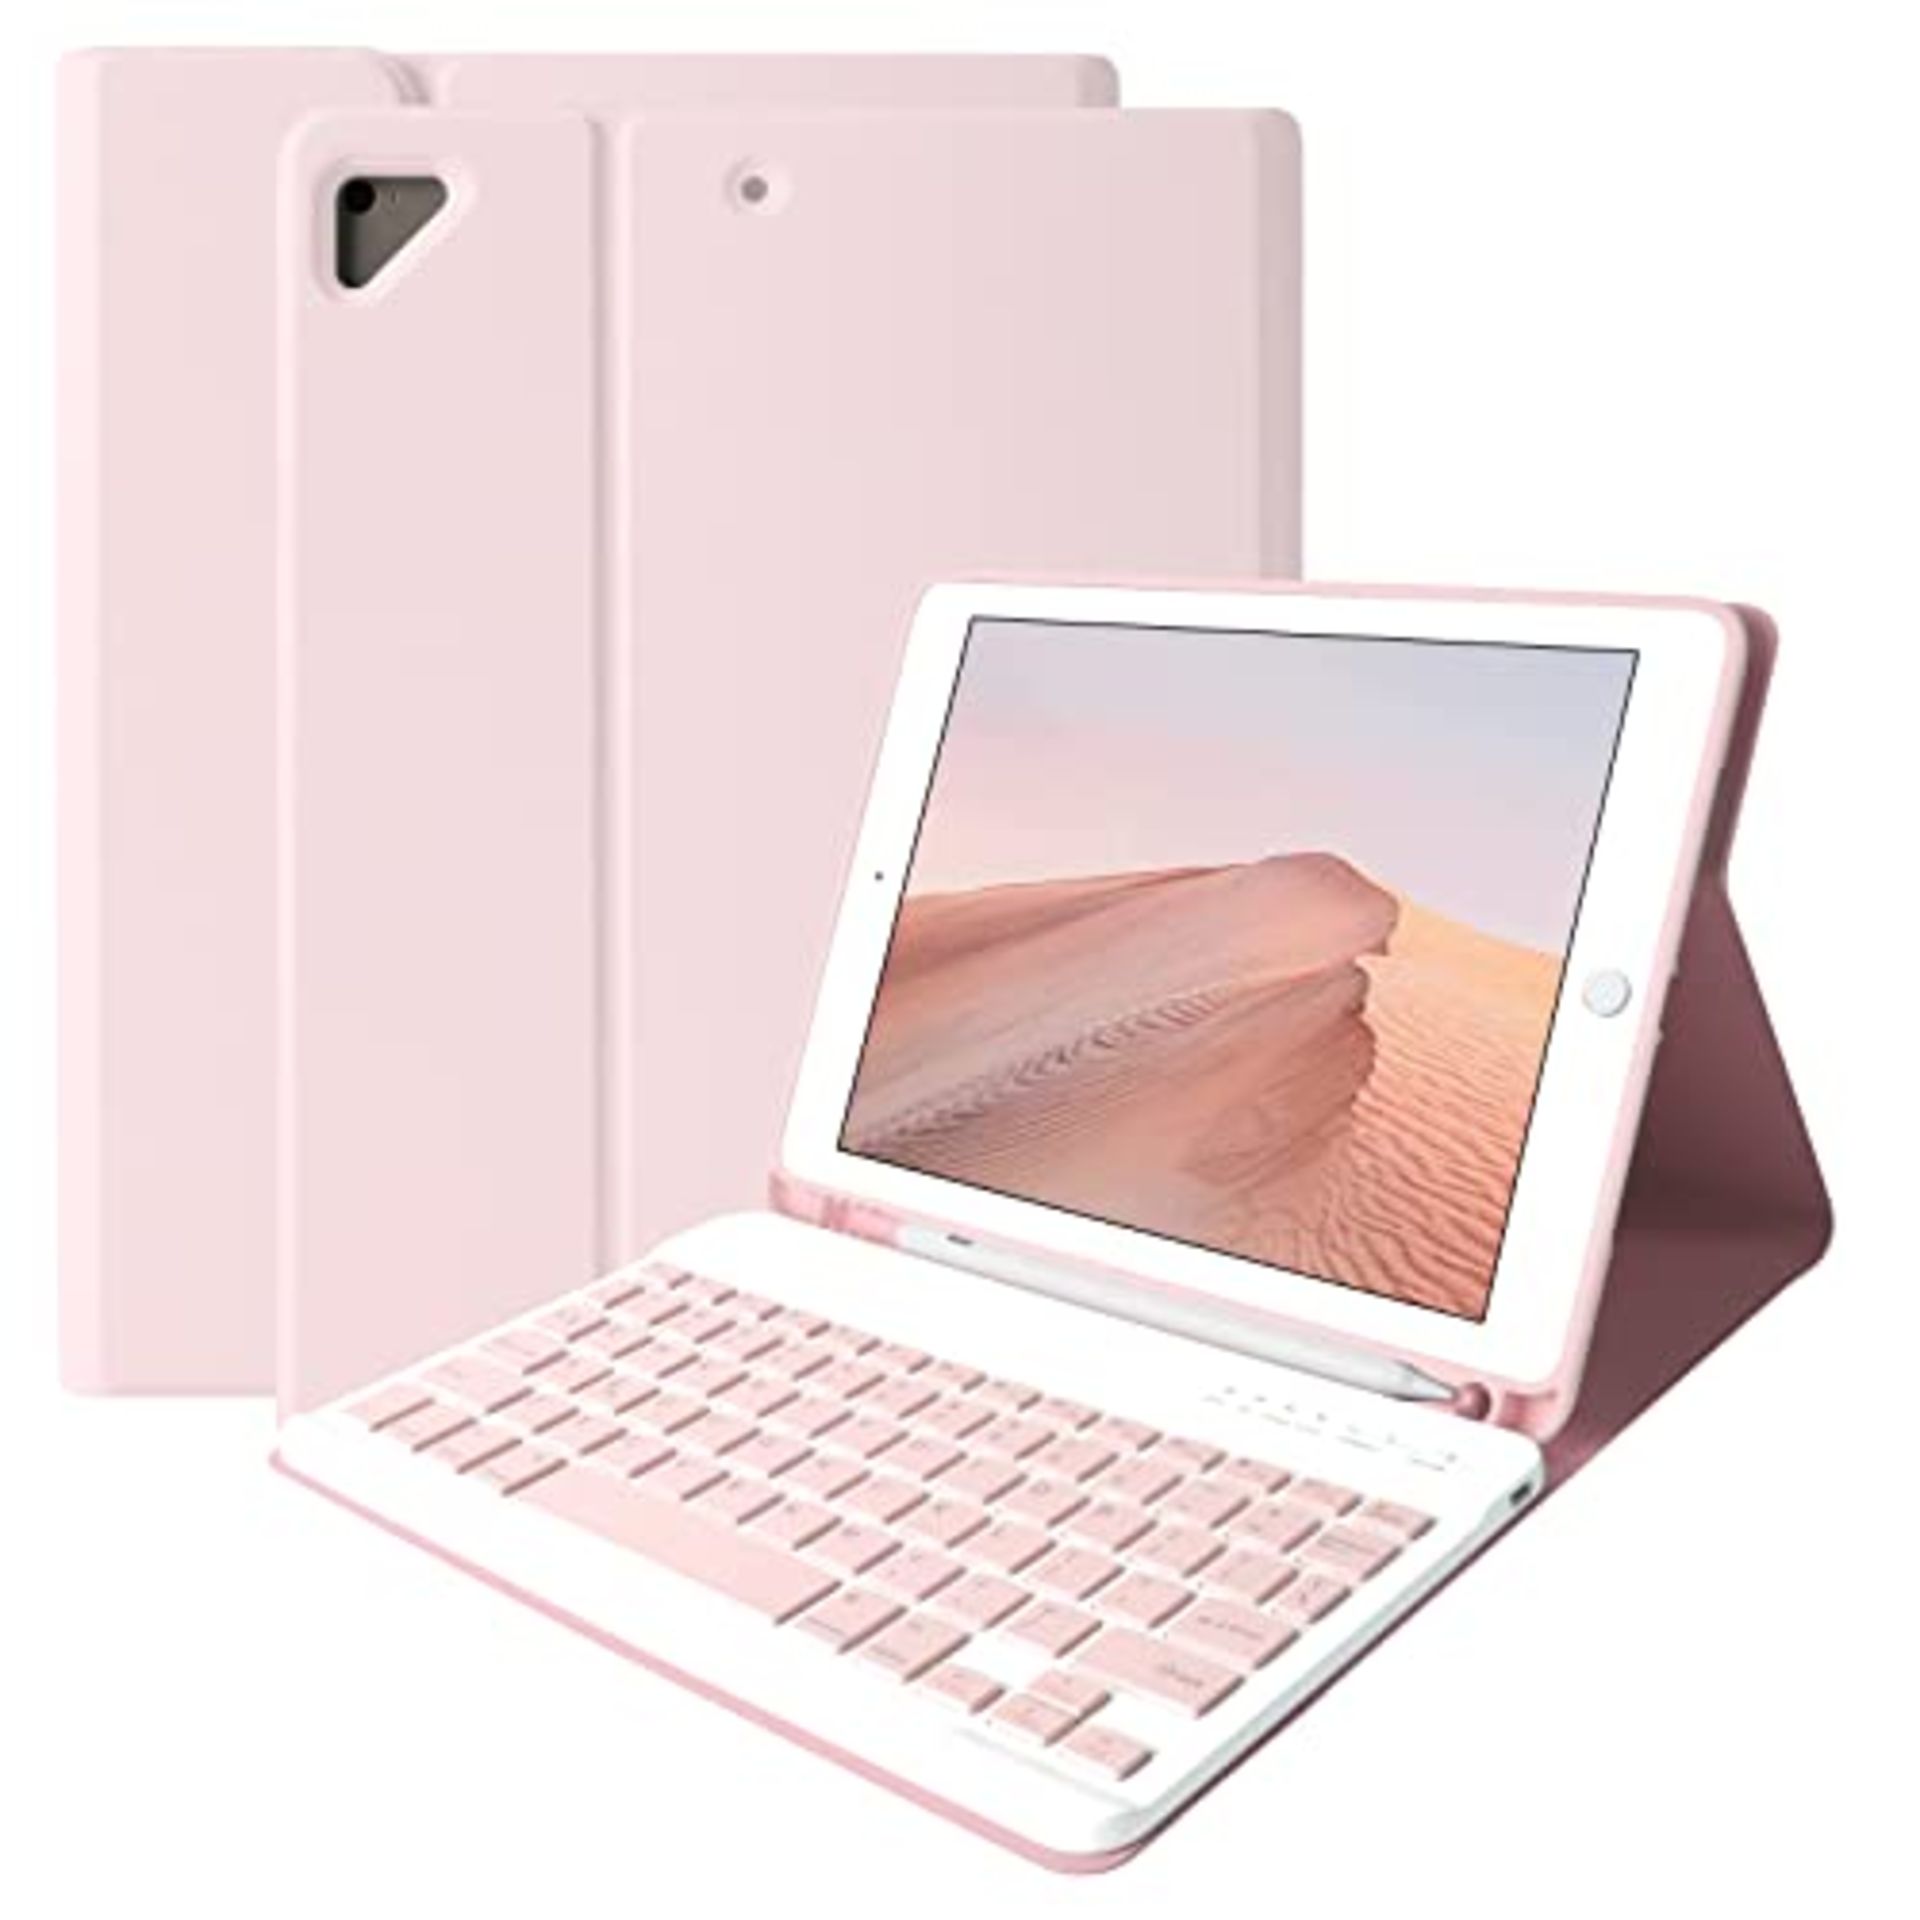 RRP £29.67 HOTLIFE iPad Keyboard Case 9.7 inch Protective Cover